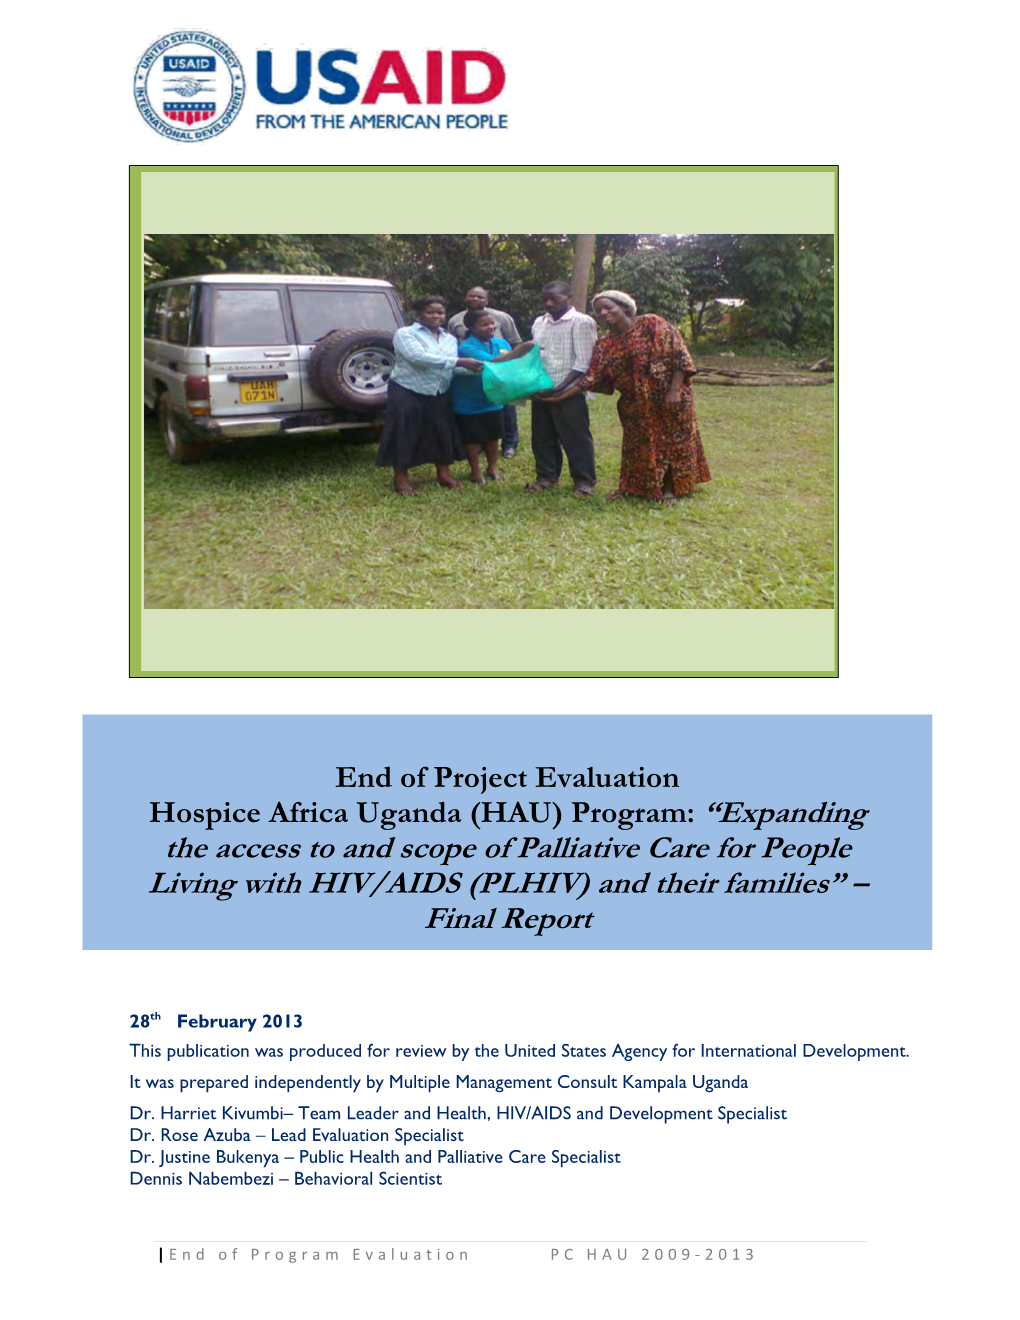 The Access to and Scope of Palliative Care for People Living with HIV/AIDS (PLHIV) and Their Families” – Final Report